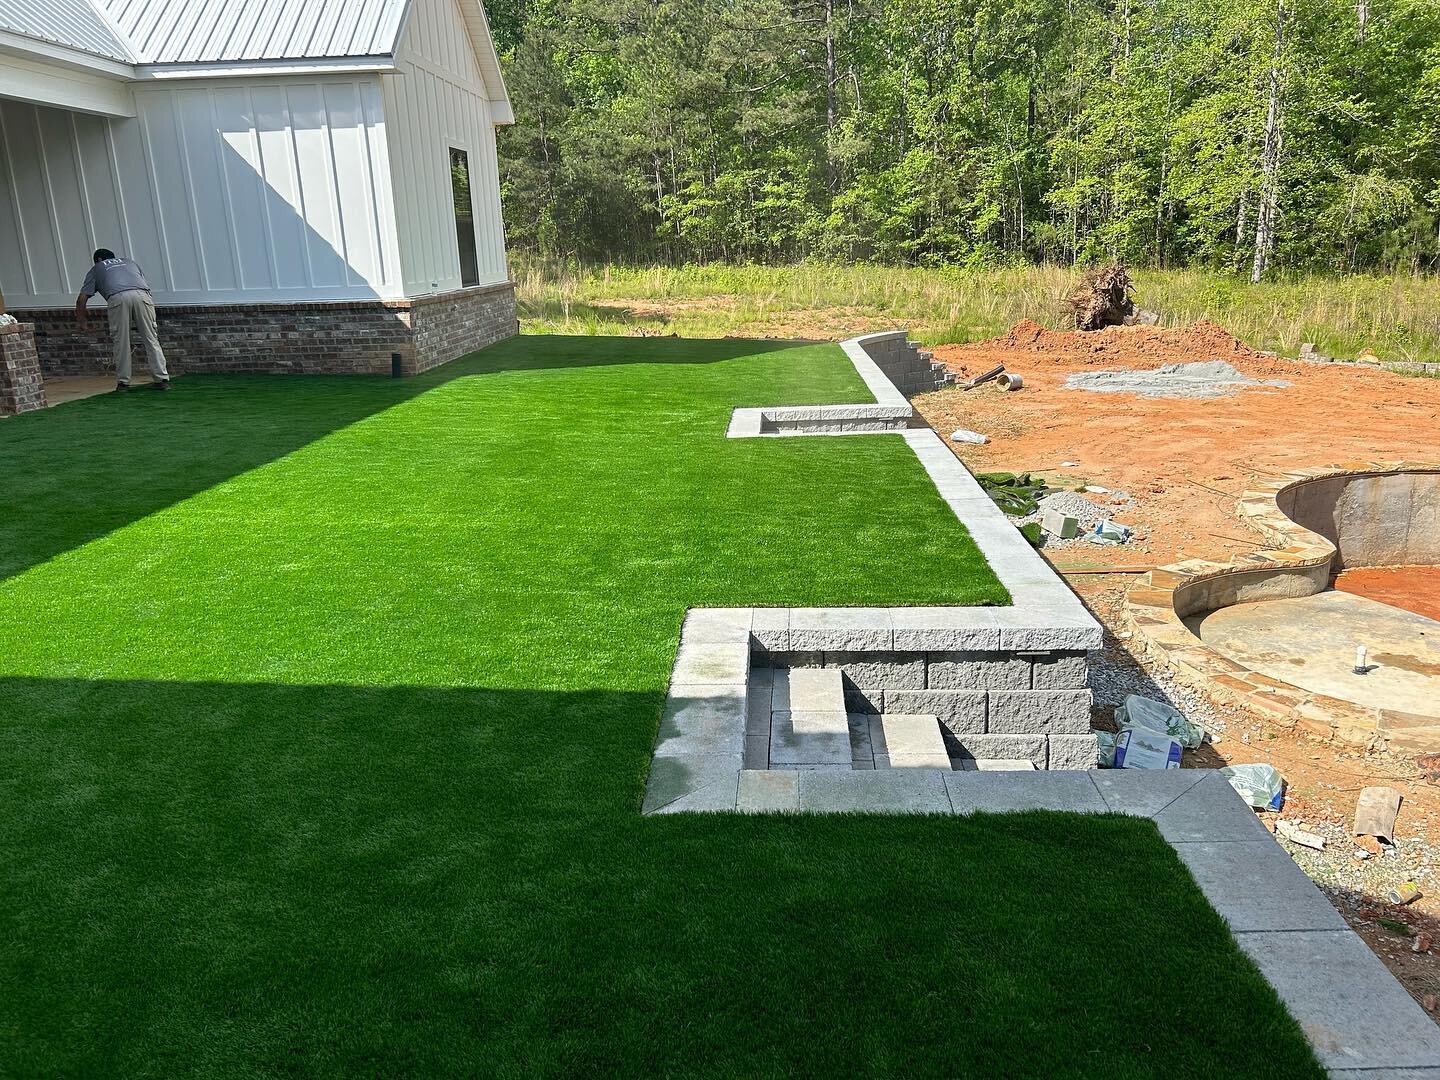 Really cool backyard terrace for this client.  Synthetic turf off the back porch, then SRW wall and steps down to pool.  Landscapes up next! 

@haley.browning @haleybrowningdesigns 

#syntheticturf #retainingwalls #hardscape #landscape